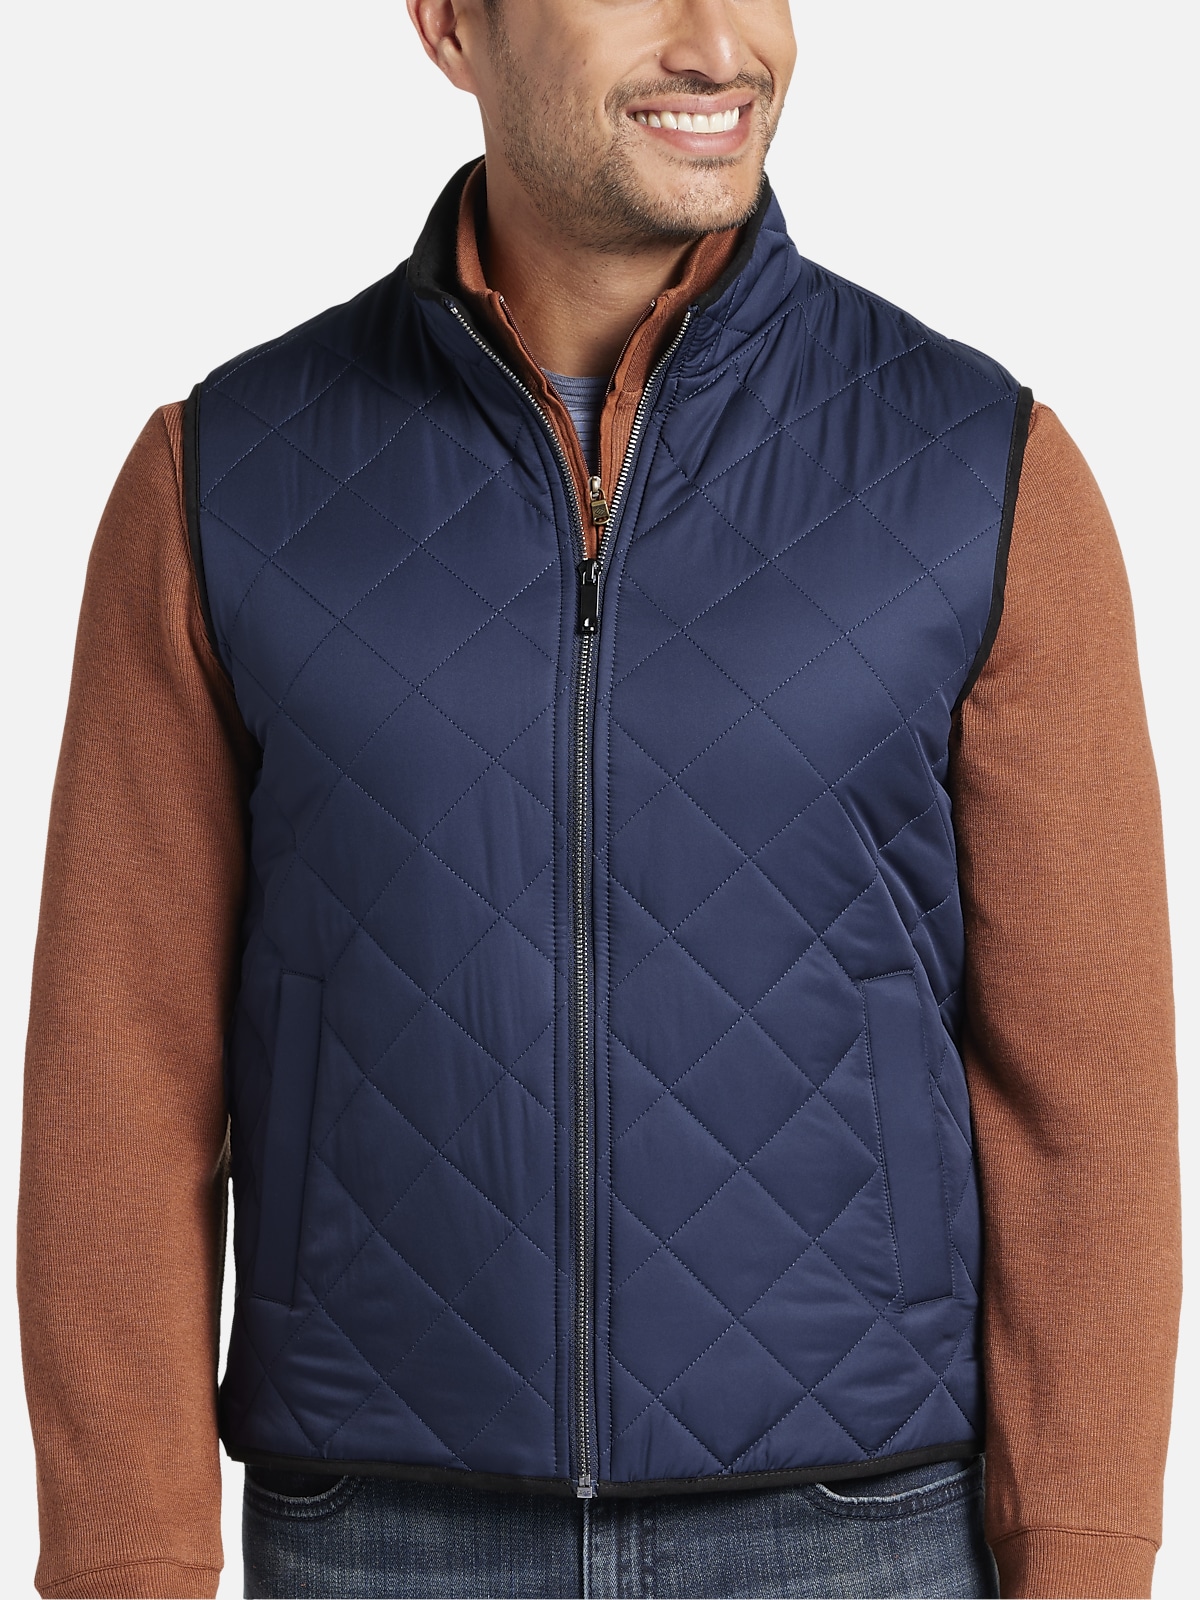 Joseph Abboud Modern Fit Quilted Vest | All Clearance $39.99| Men's ...